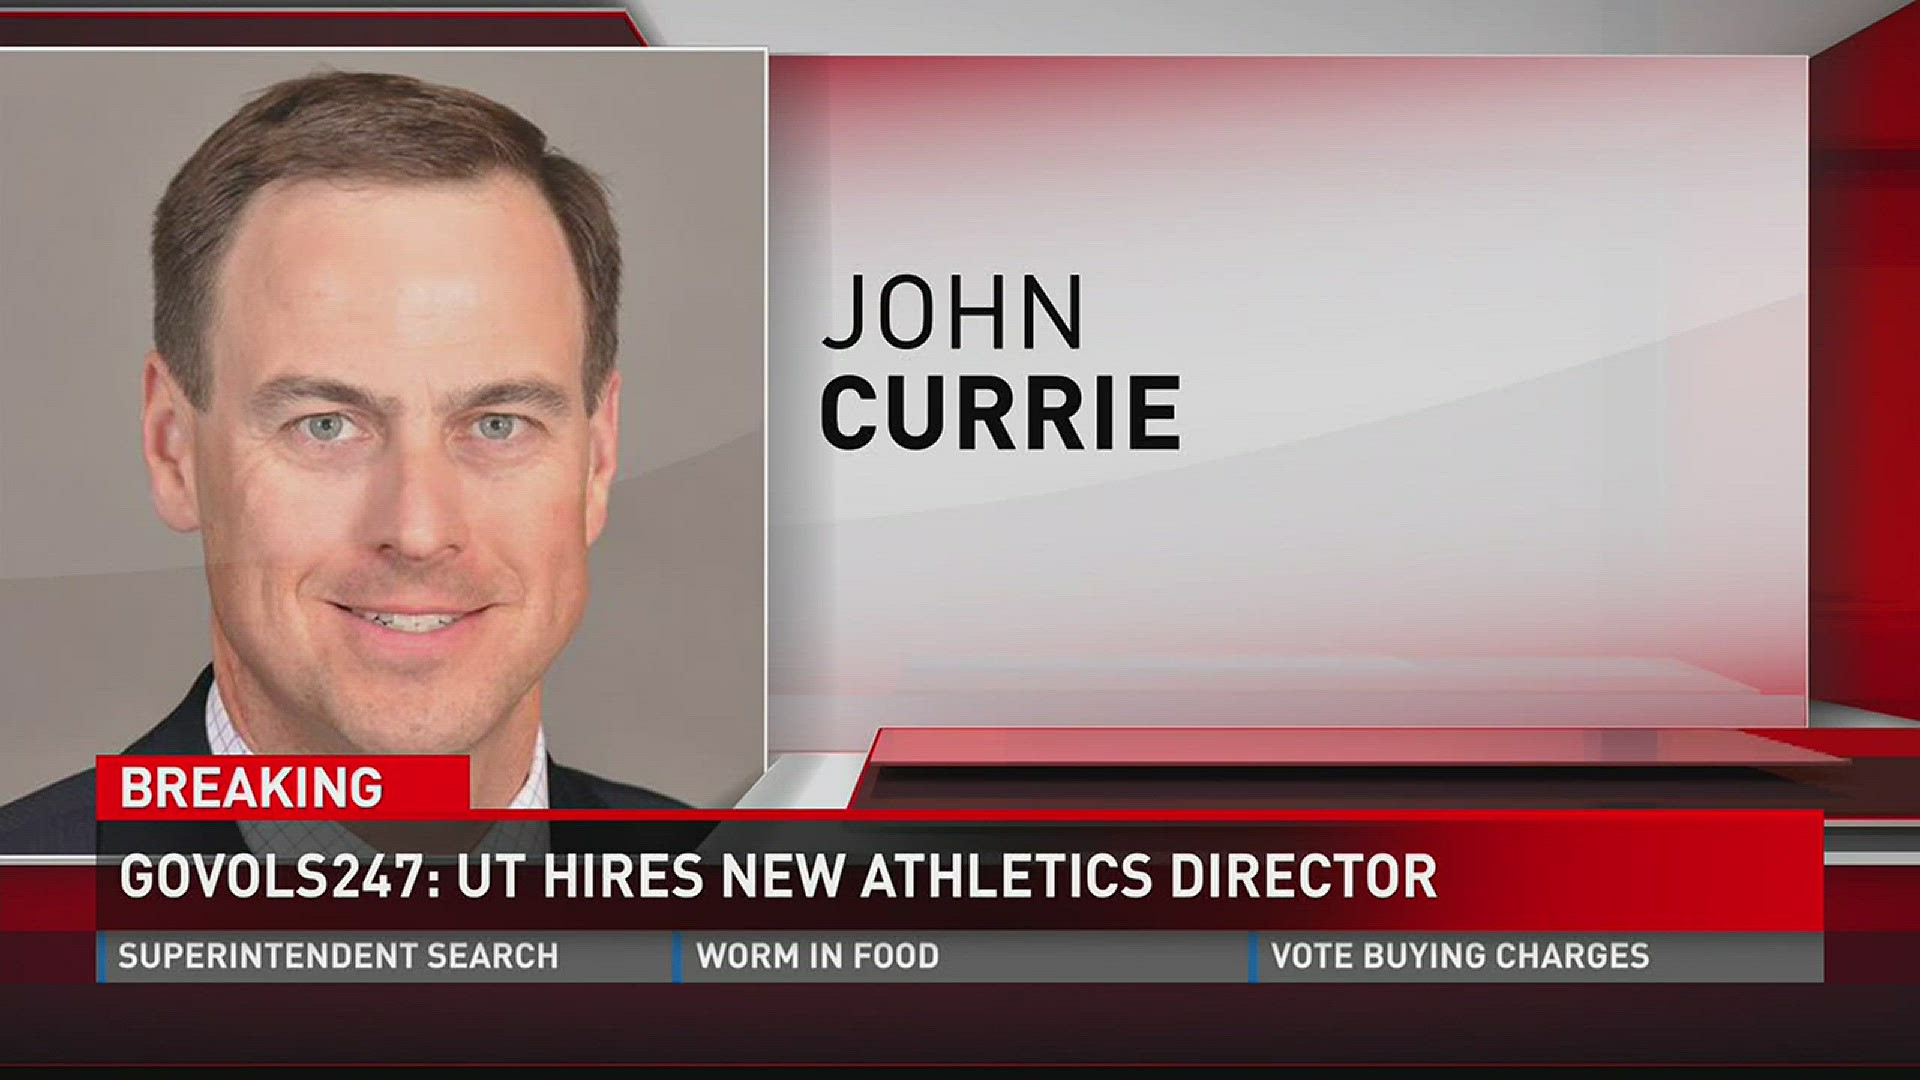 The University of Tennessee has named John Currie as its new director of athletics, multiple sources have told our partners at GoVols247. (2/28/17 Noon)